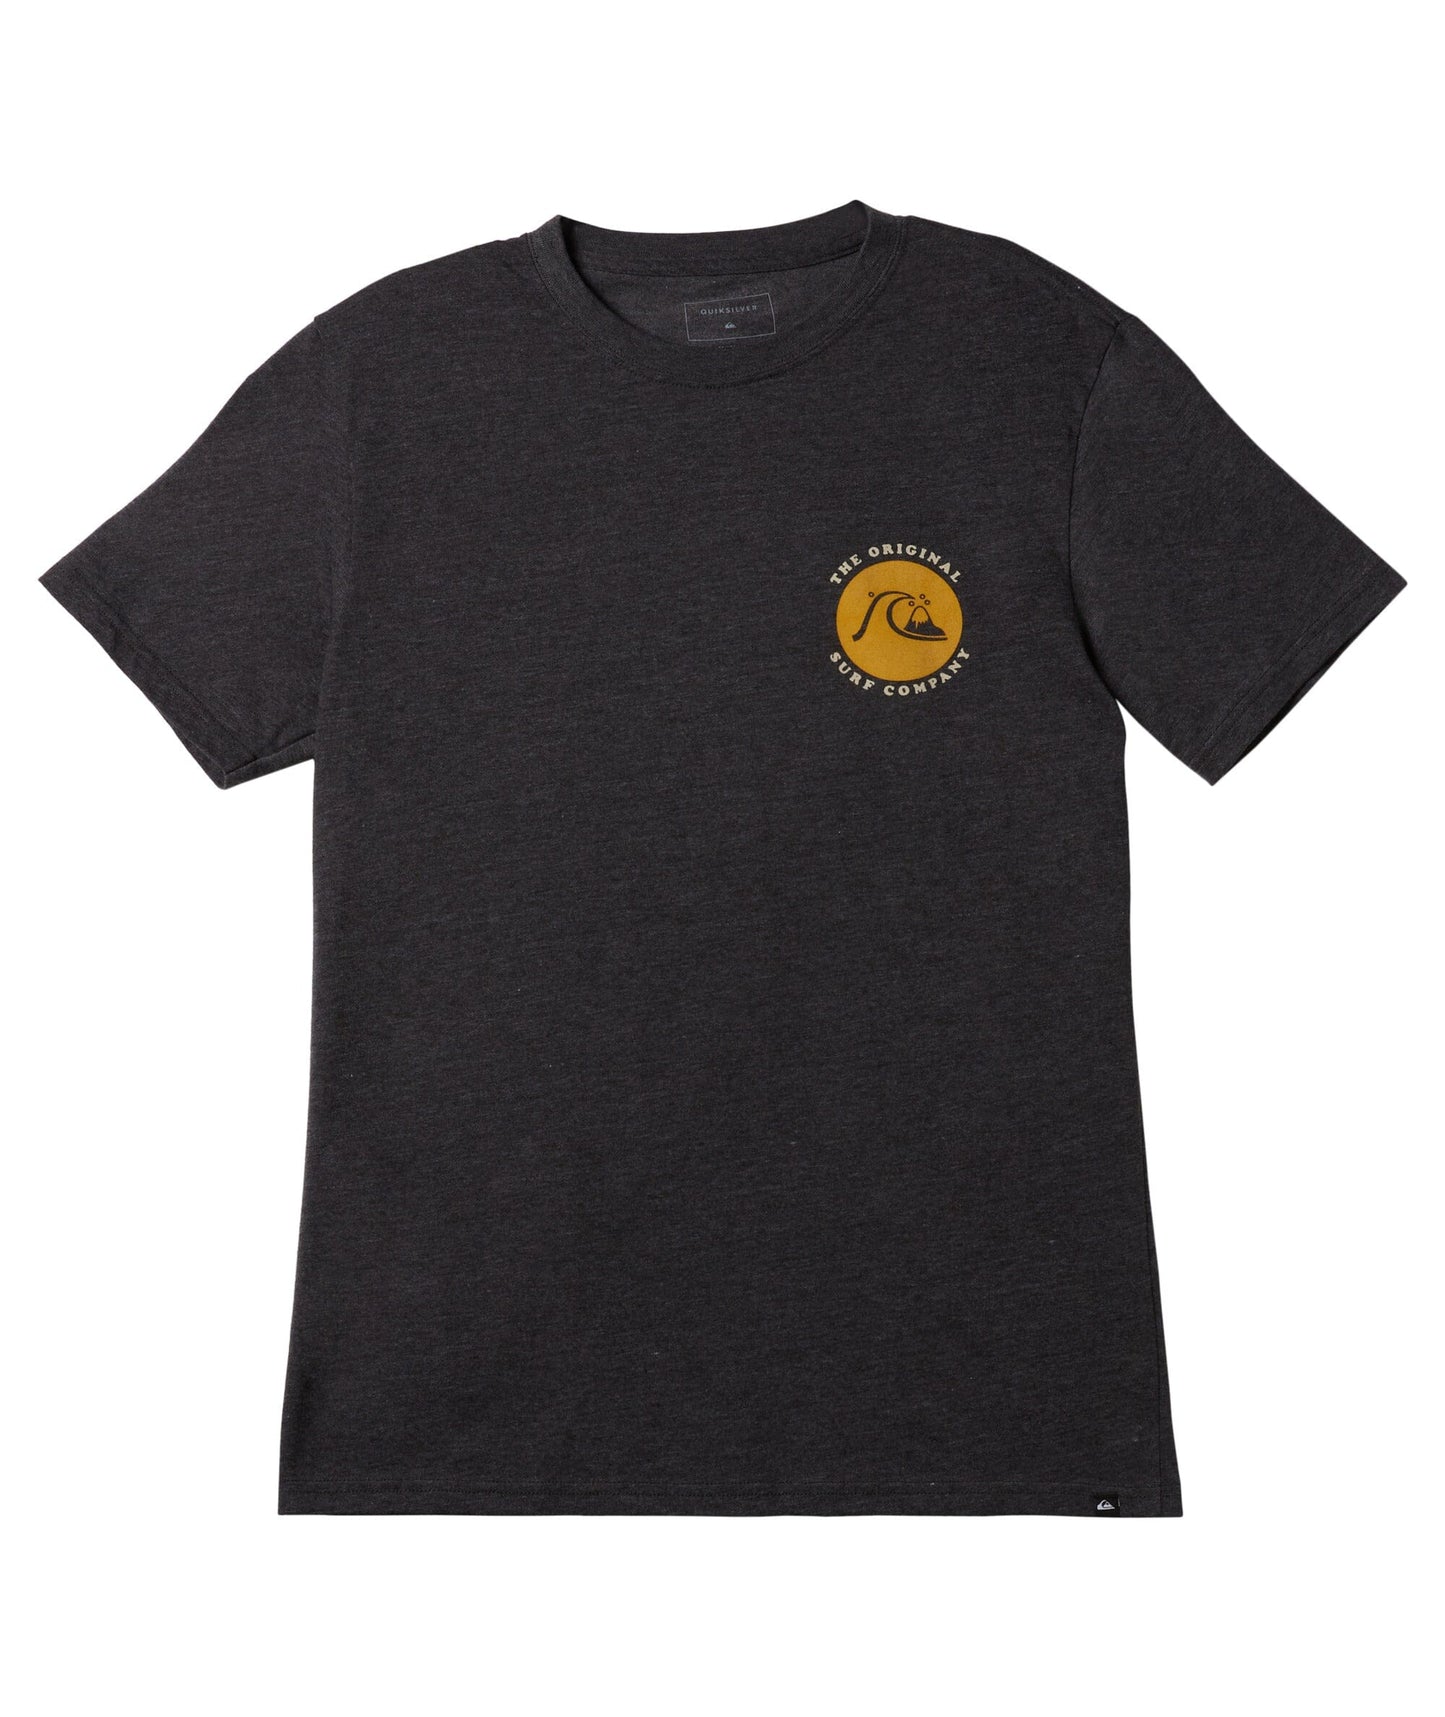 Quiksilver Stamped T-Shirt